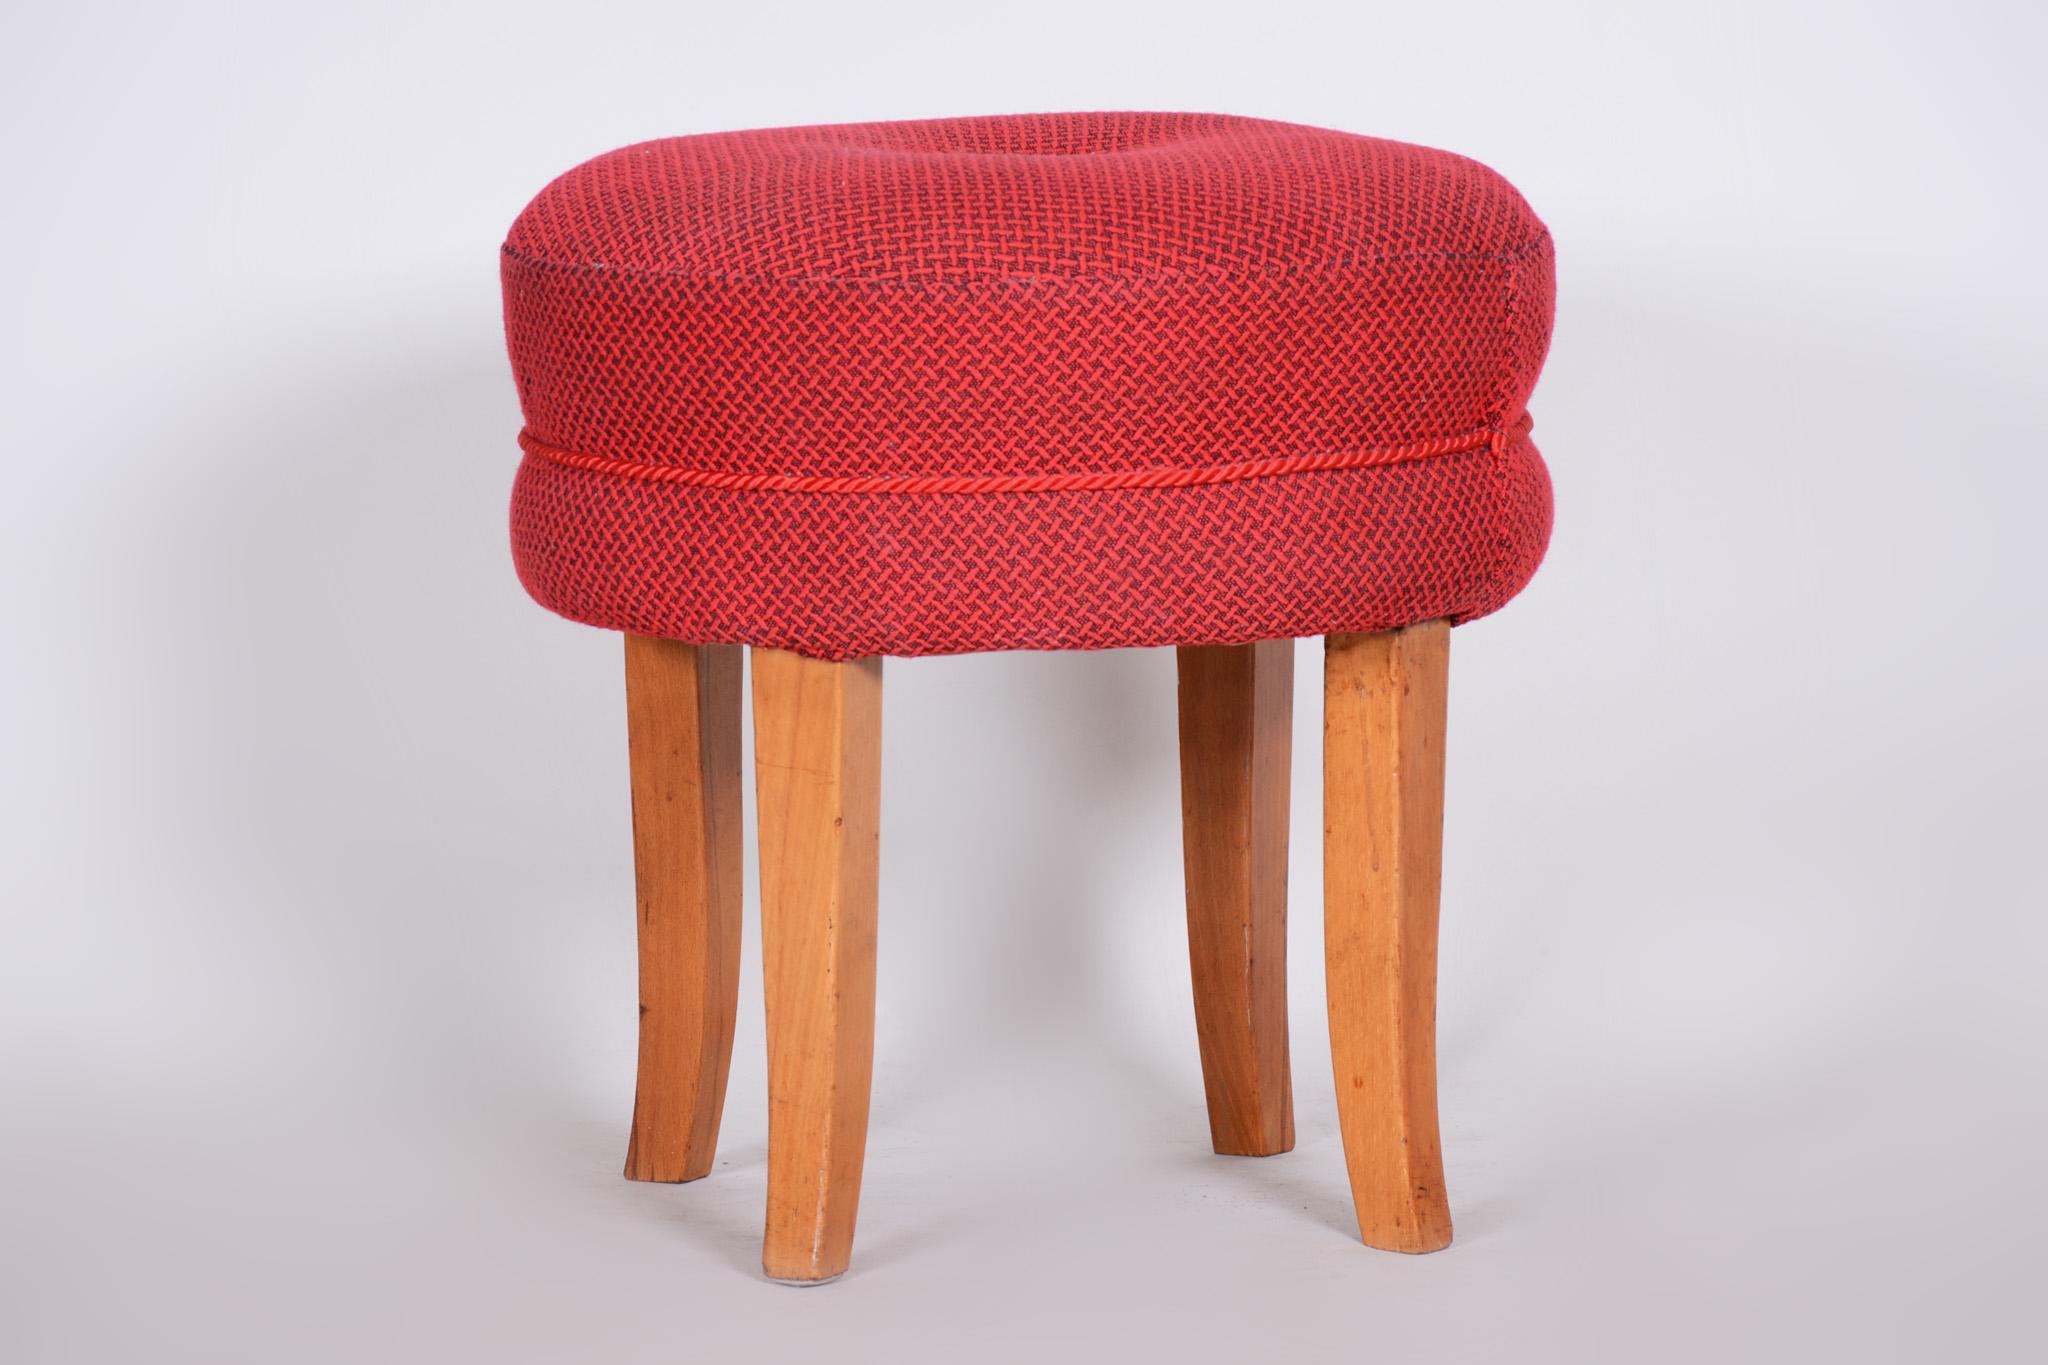 Midcentury stool from Czechoslovakia
Original well preserved condition
Period: 1950-1959.